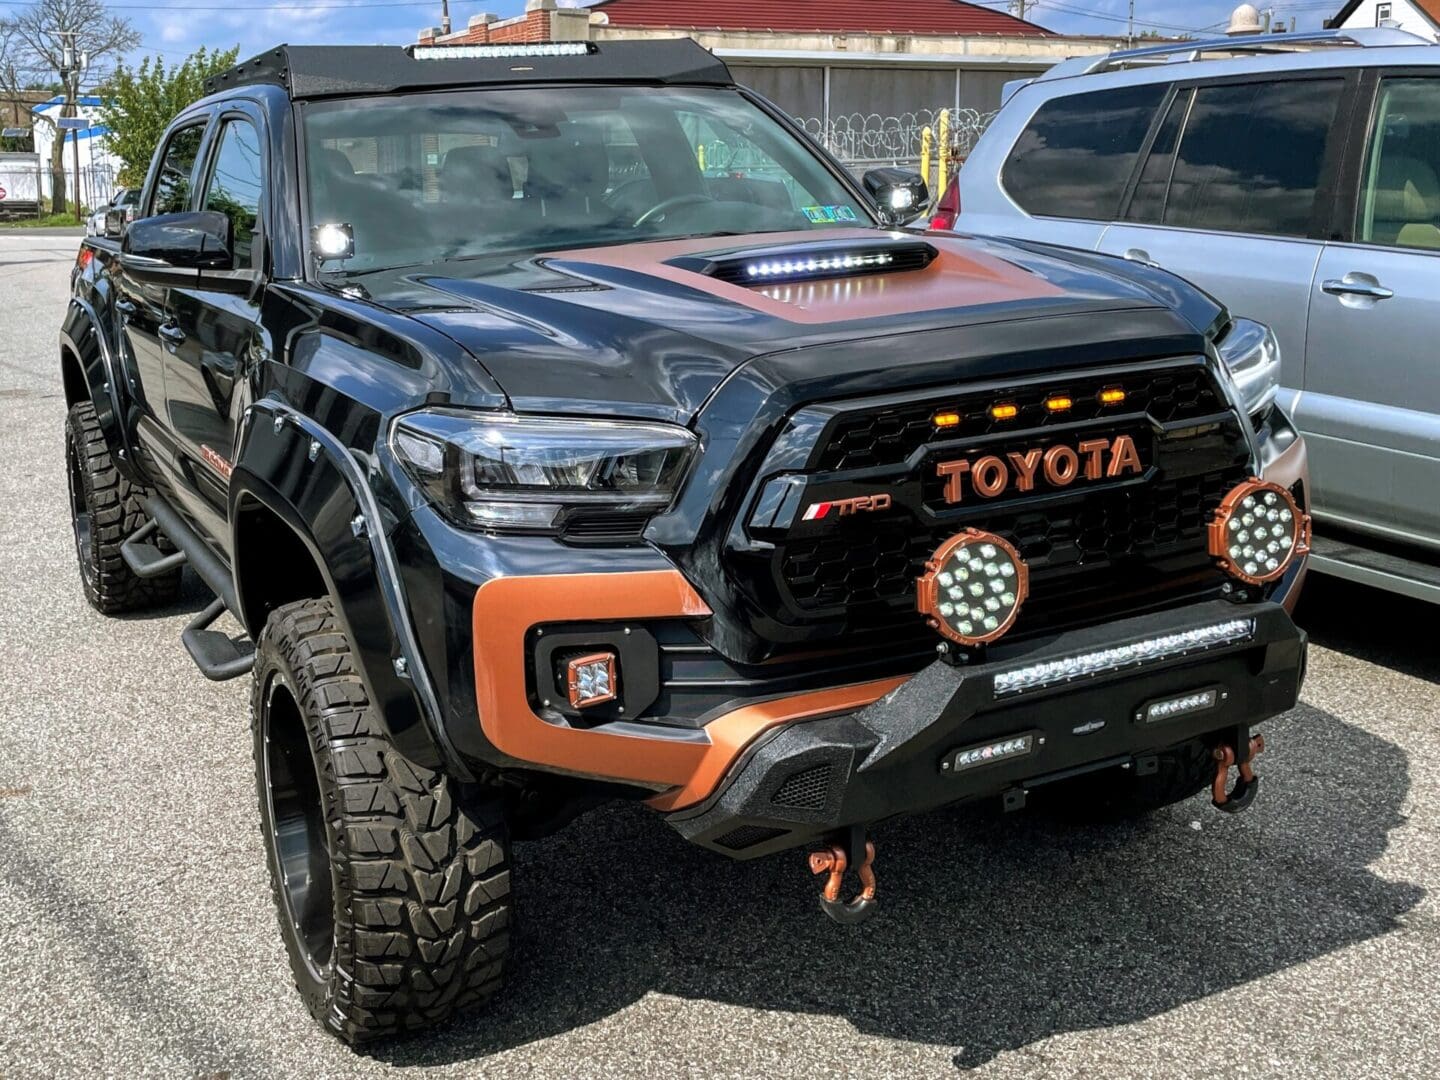 A black and orange toyota truck parked in the parking lot.